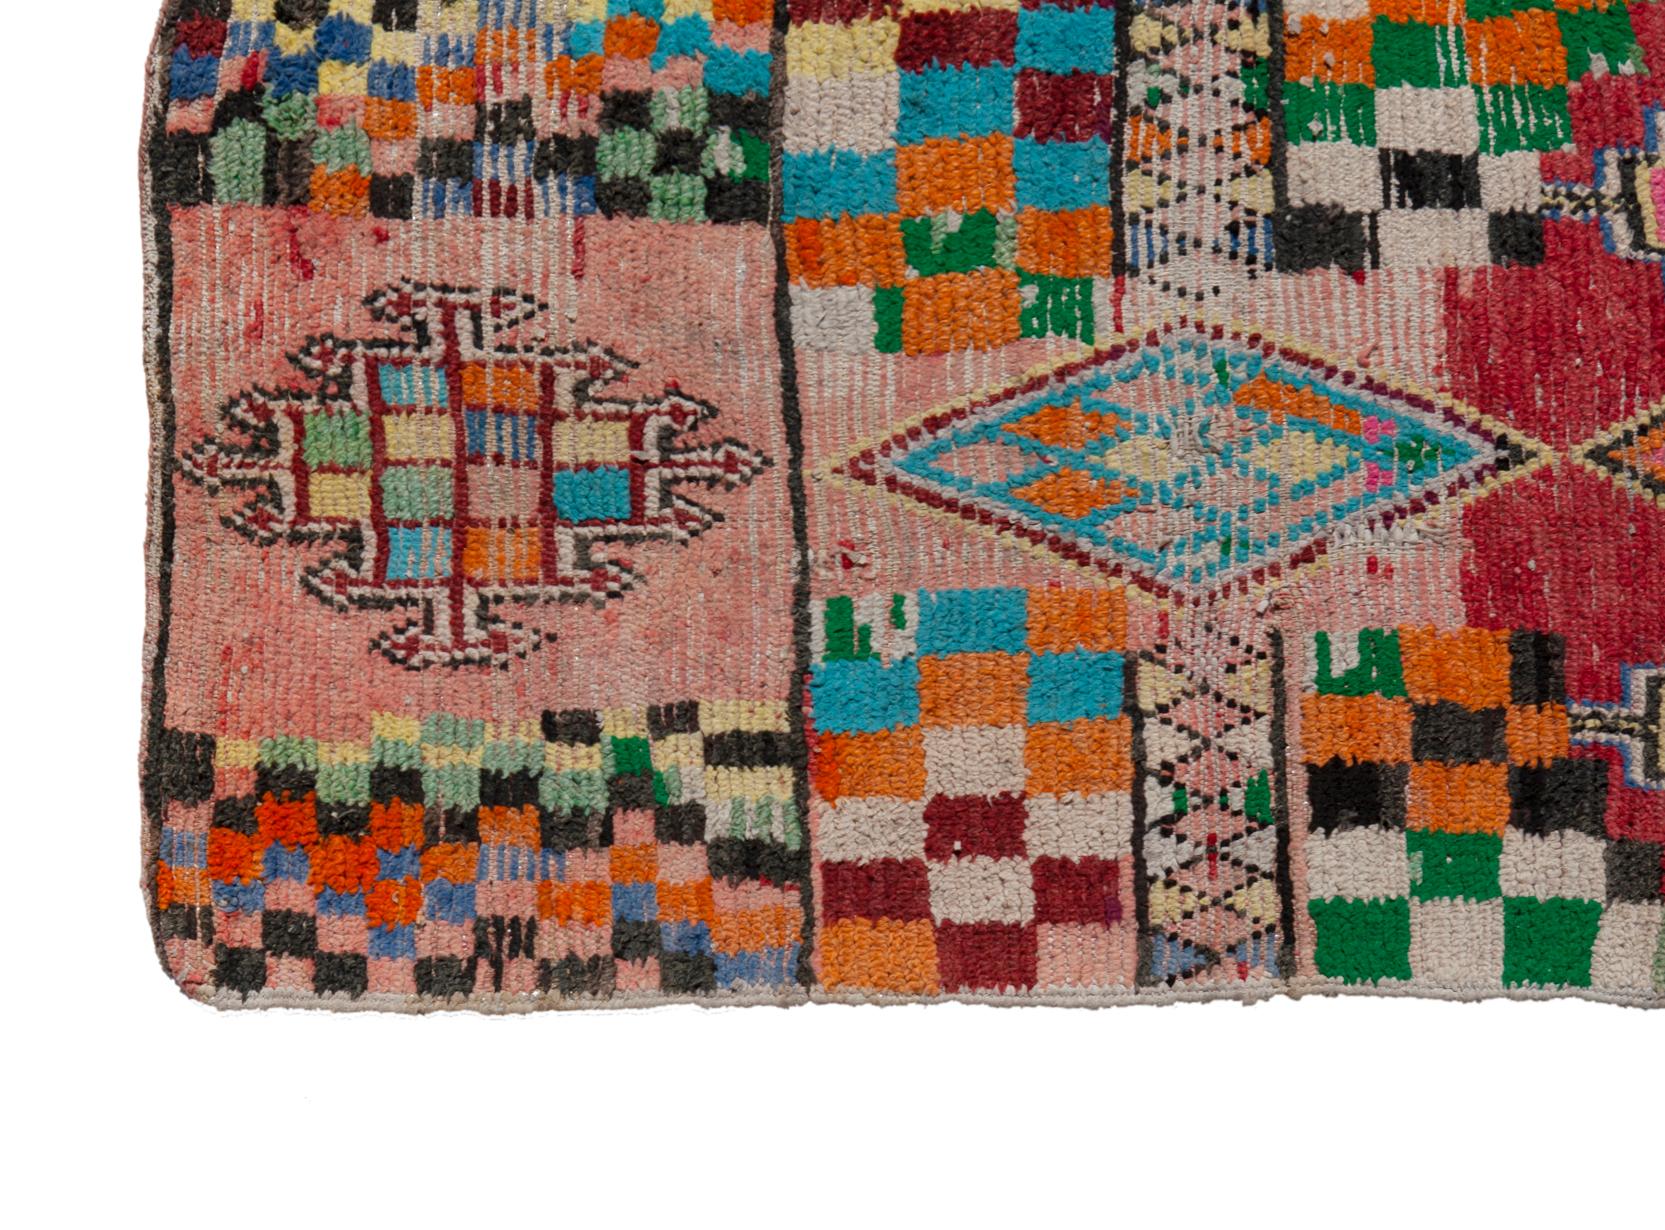 From Morocco, this colorful one-of-a-kind runner woven in a tribal Berber village that specializes in these colorful woven patterns.
The wool has been vegetable dyed.
Purchased from the personal collection of the late actress, Anne Hecht.